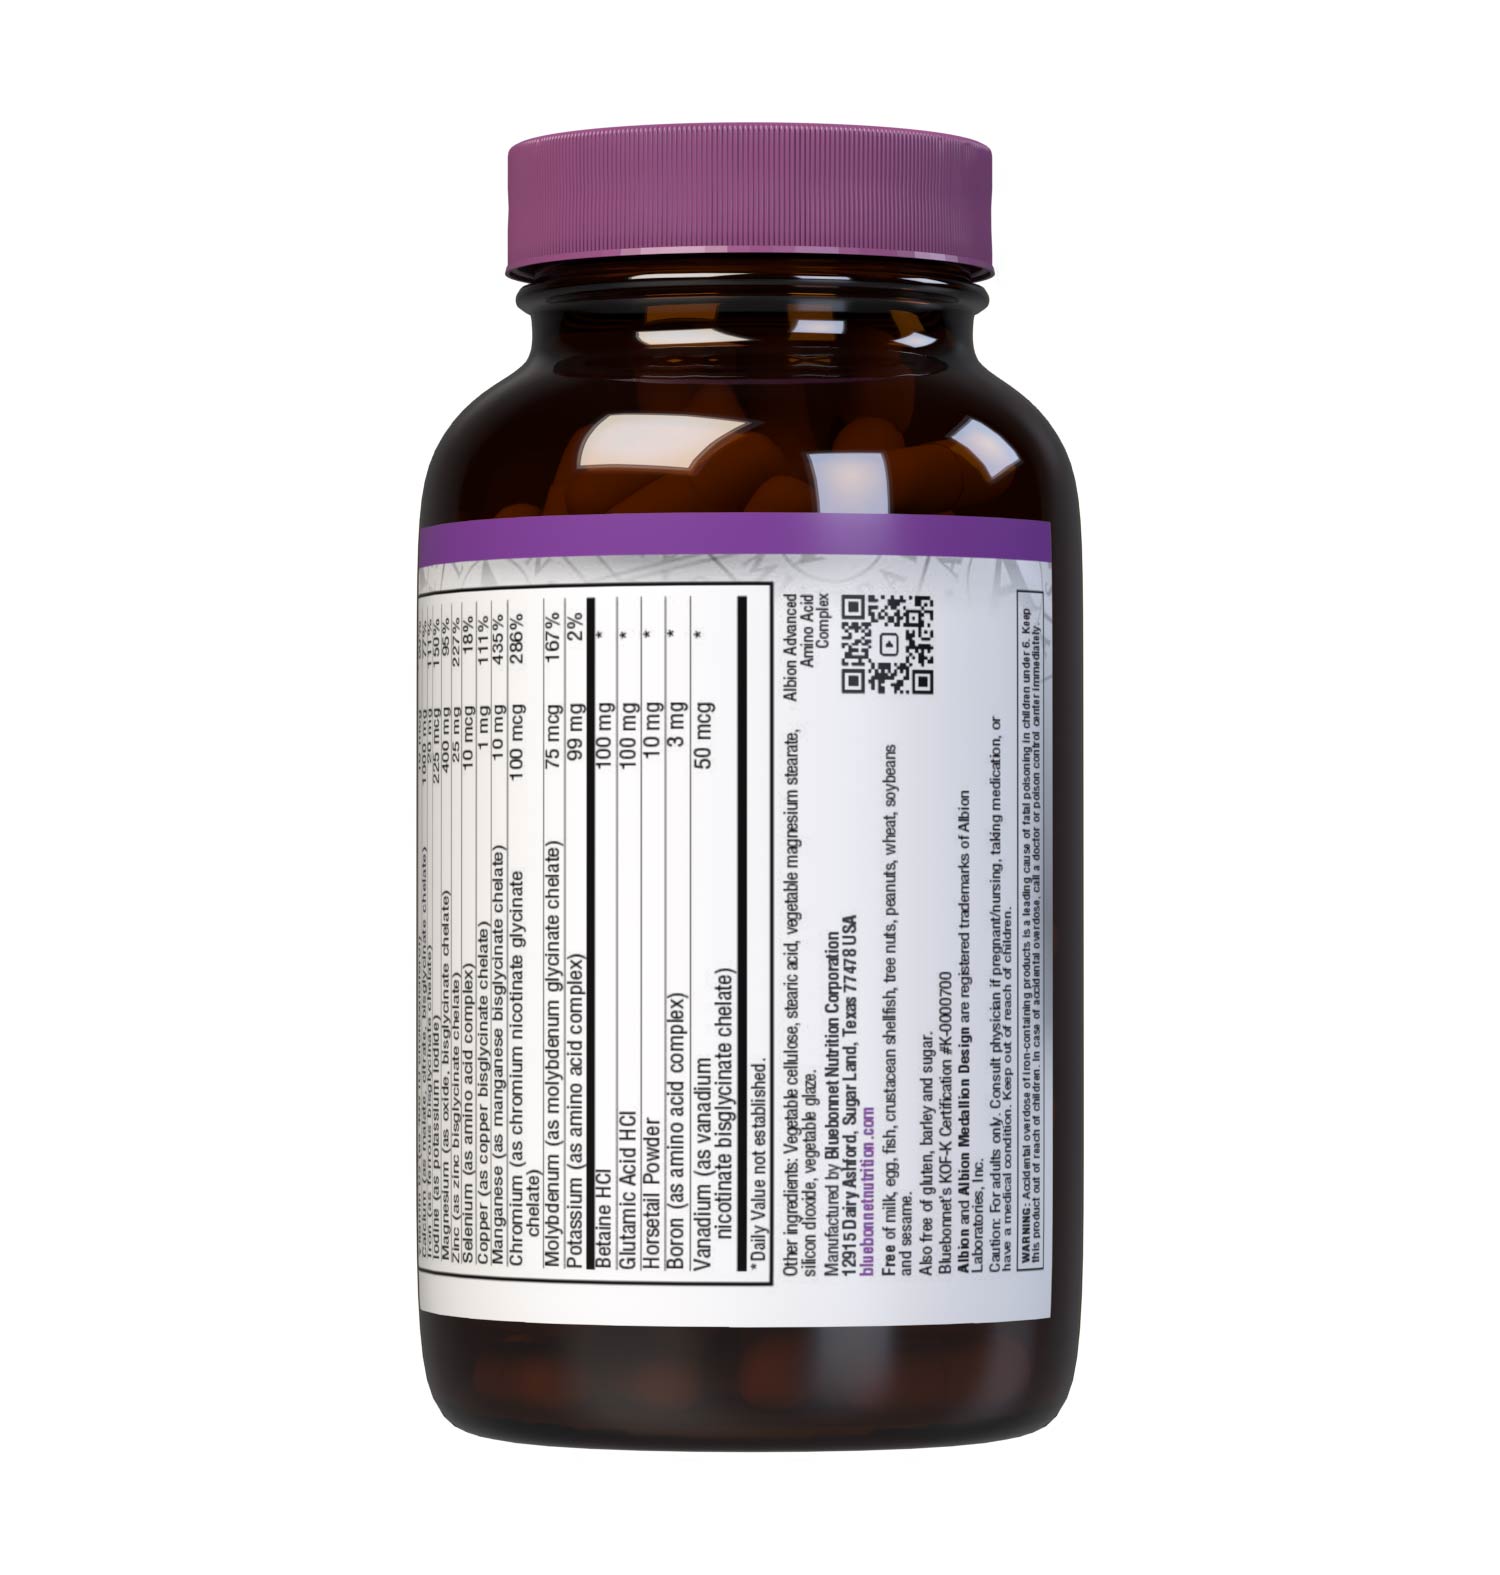 Bluebonnet’s Albion Chelated Multiminerals 120 Caplets are formulated with a fully reacted amino acid chelate multimineral supplement formulated with iron and advanced chelating agents, including: malates, citrates and glycinates. Description panel. #size_120 count